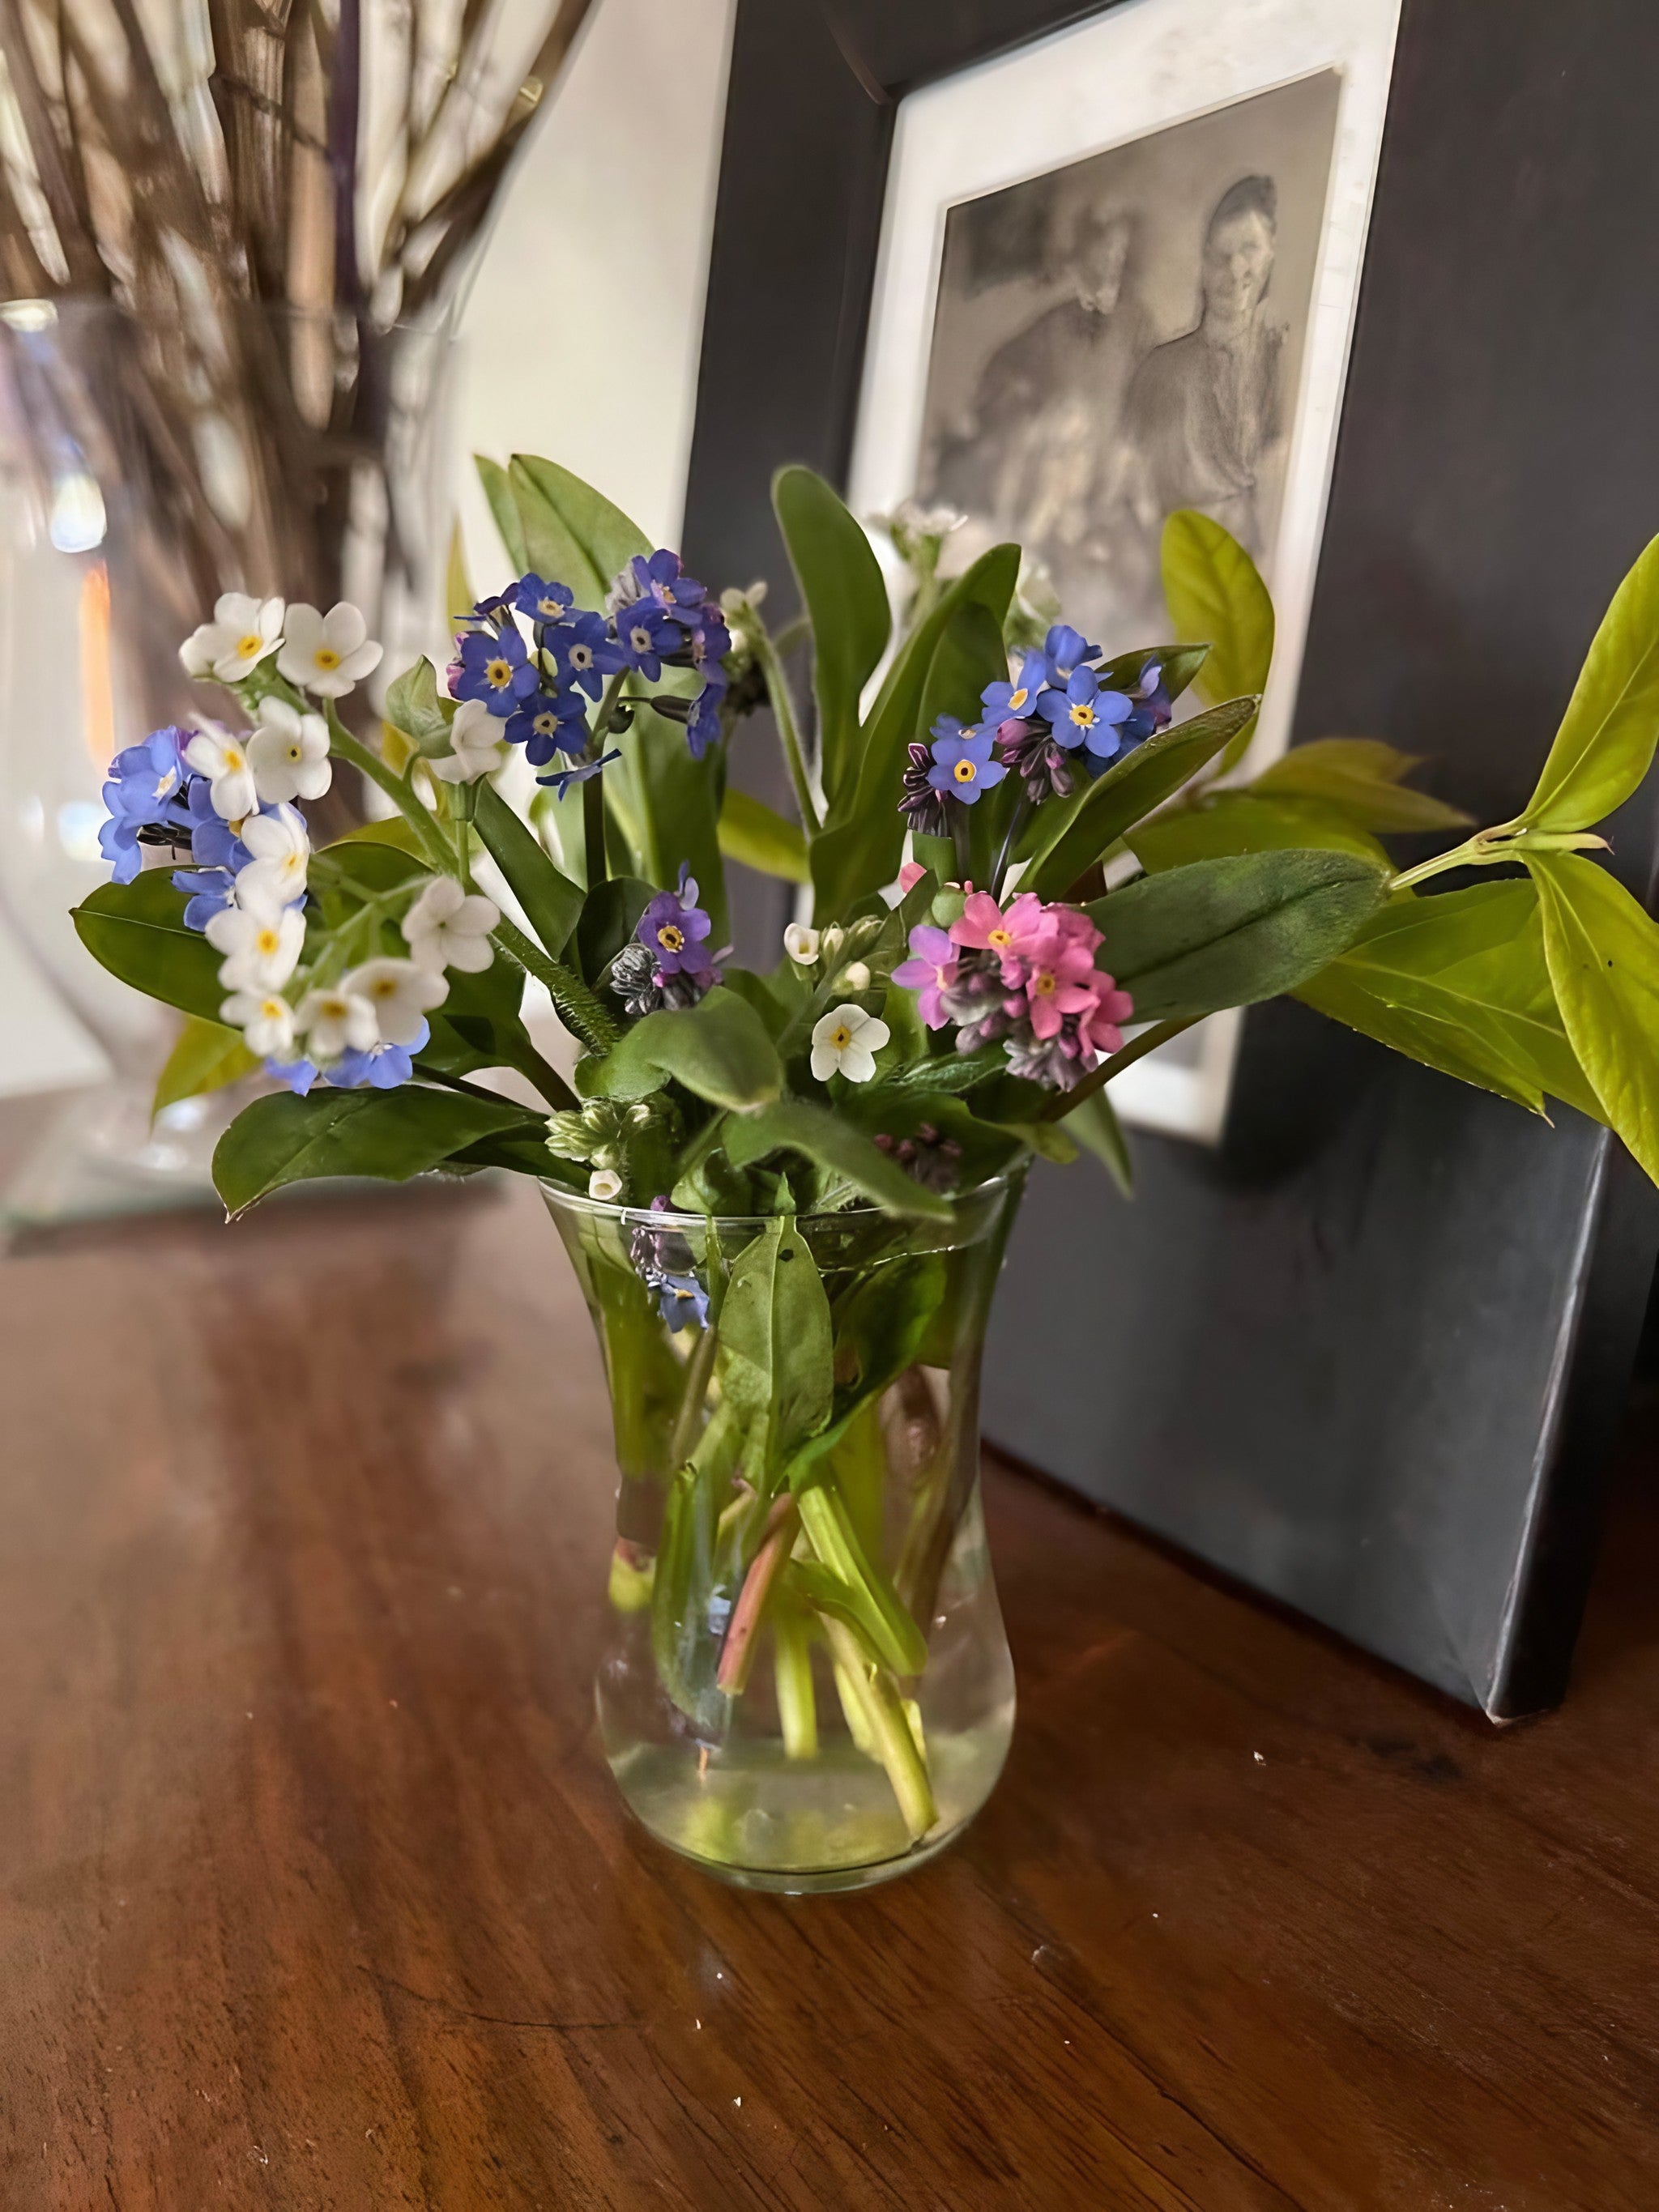 Forget-me-not Victoria Mixed flowers arranged in a vase on a table